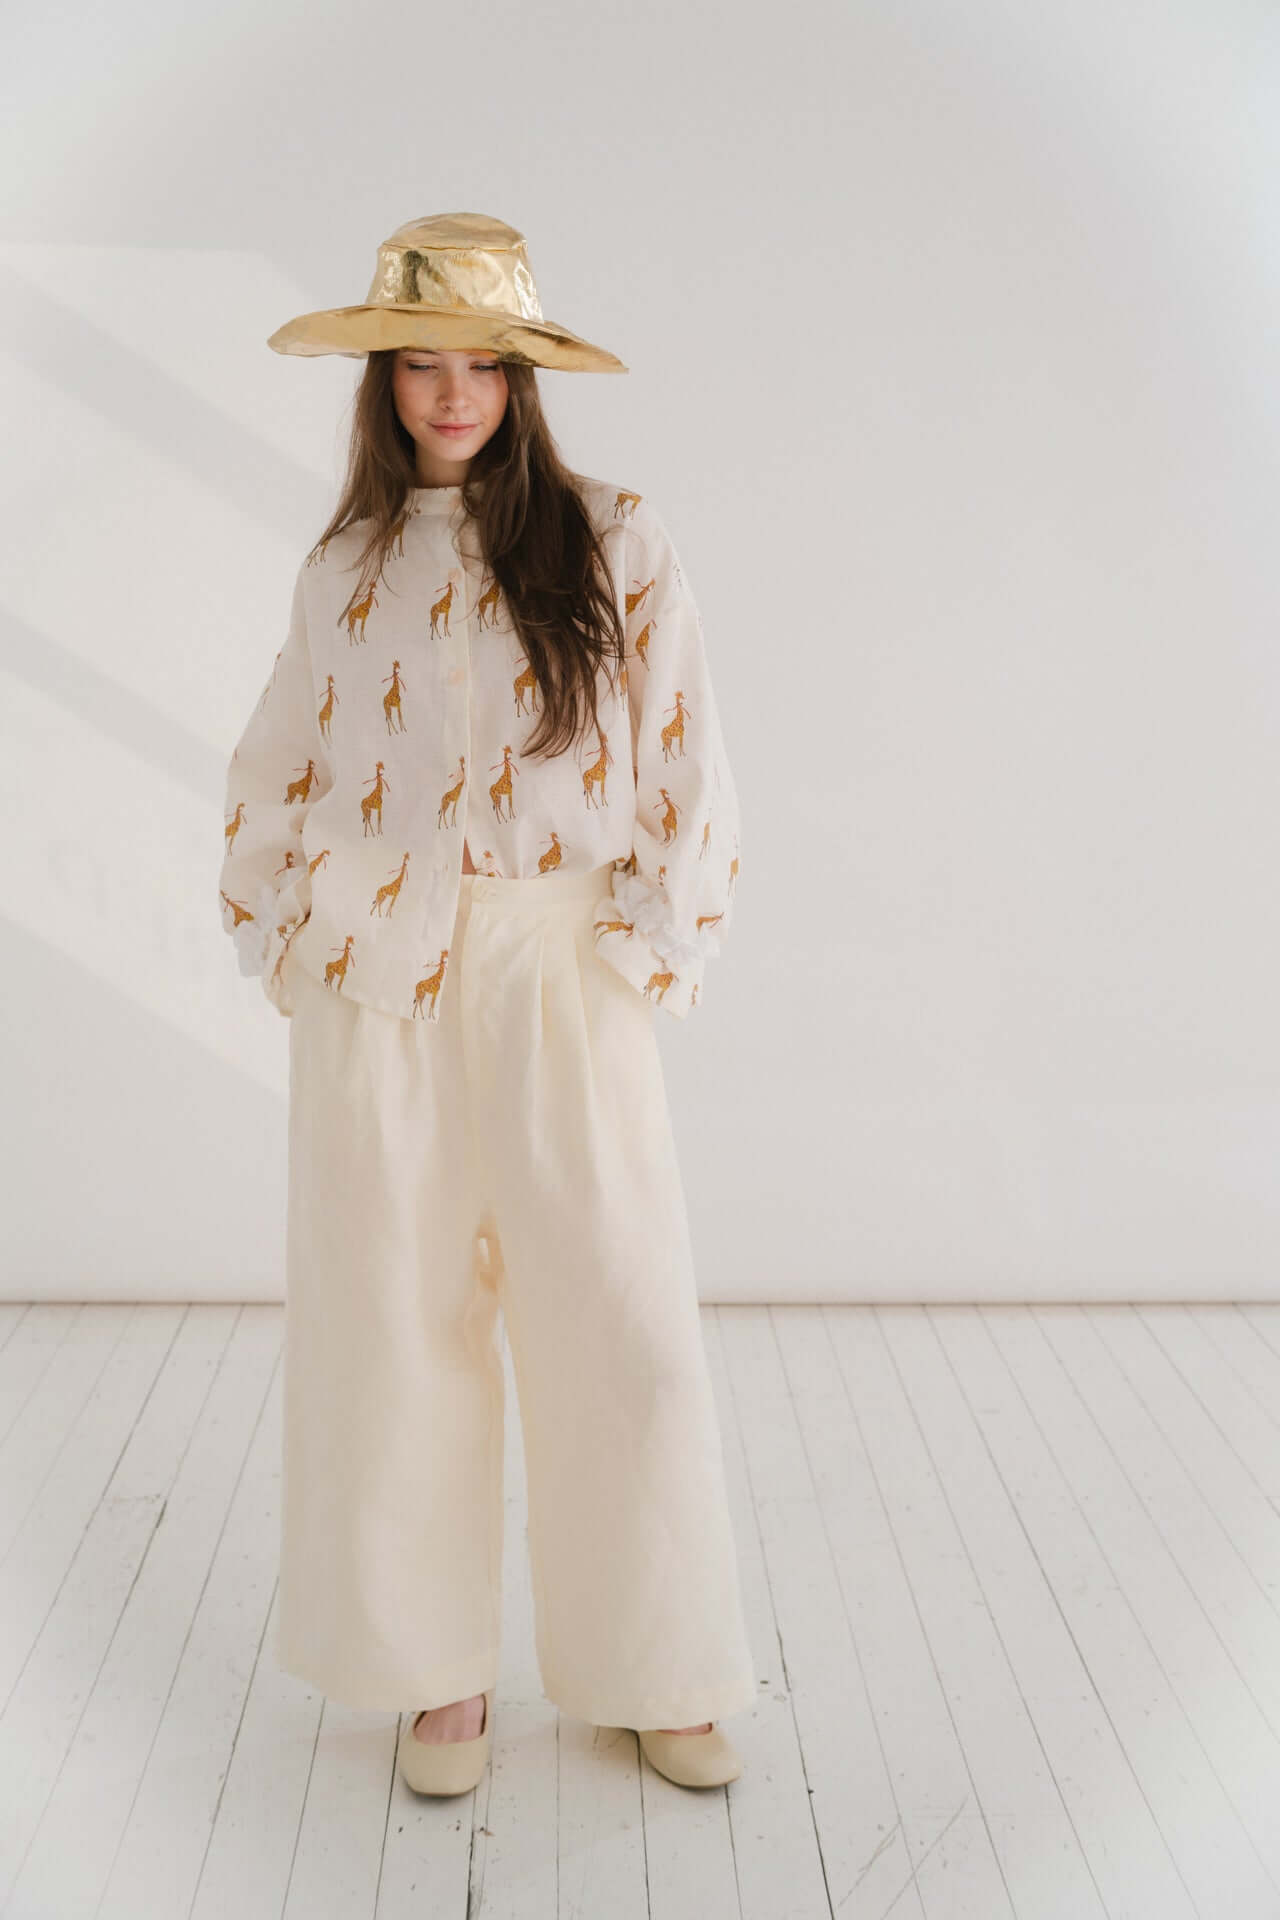 GOLD BEETLED SUN HAT | Inject some personality into any of your Summer looks with our Gold Beetled Sun hat. Created with our much loved Gold beetled linen. The hat features a wide brim that will shade you from the rays this Summer. This piece is made with